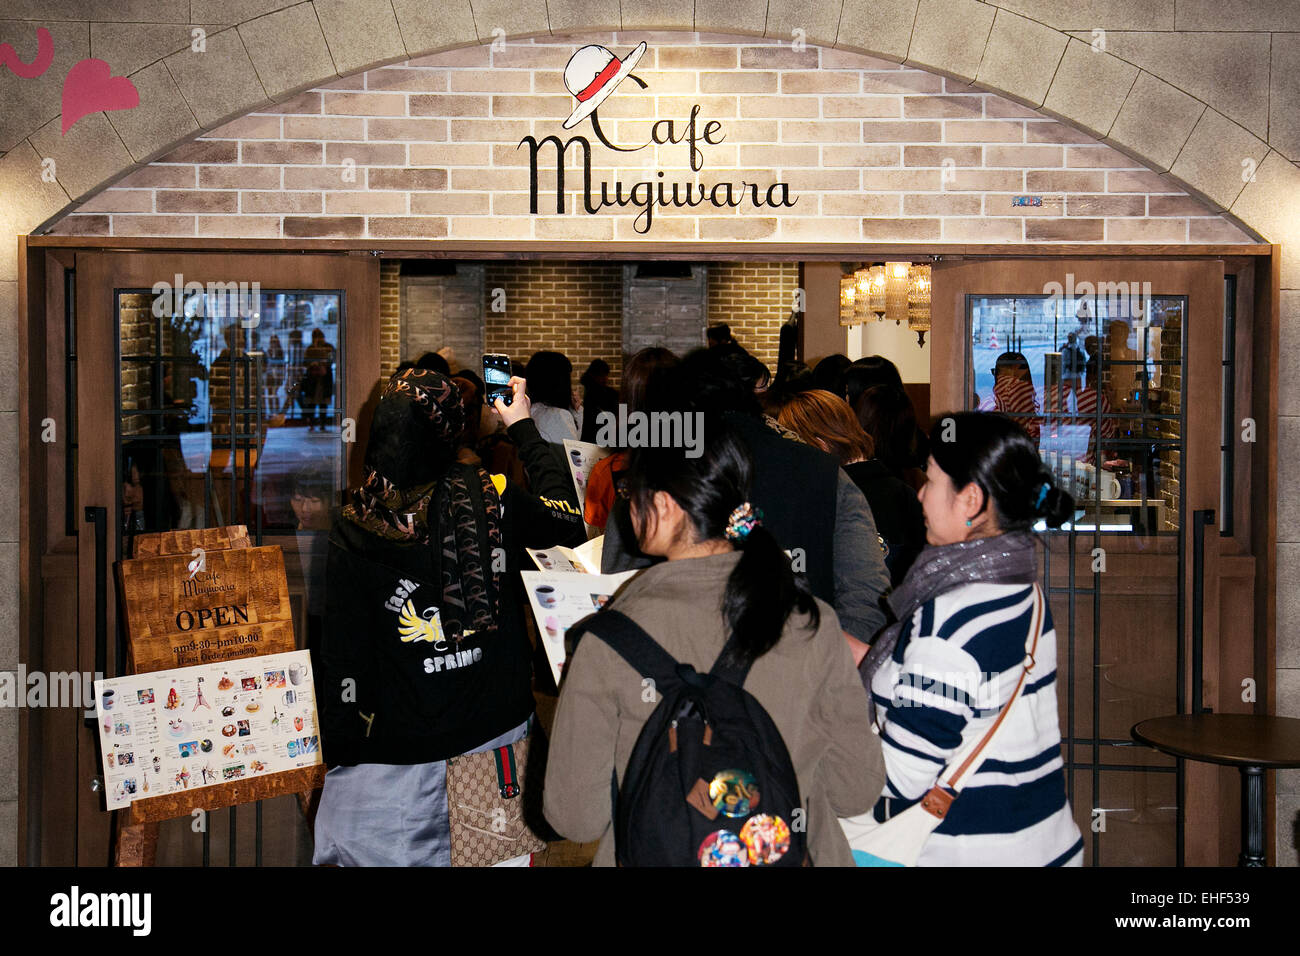 Tokyo Japan 13th March 15 Tokyo Tower Opens One Piece Attraction Visitors To Tokyo Tower Make A Line At The Entrance The Cafe Mugiwara One Of The Attractions Of The New Tokyo